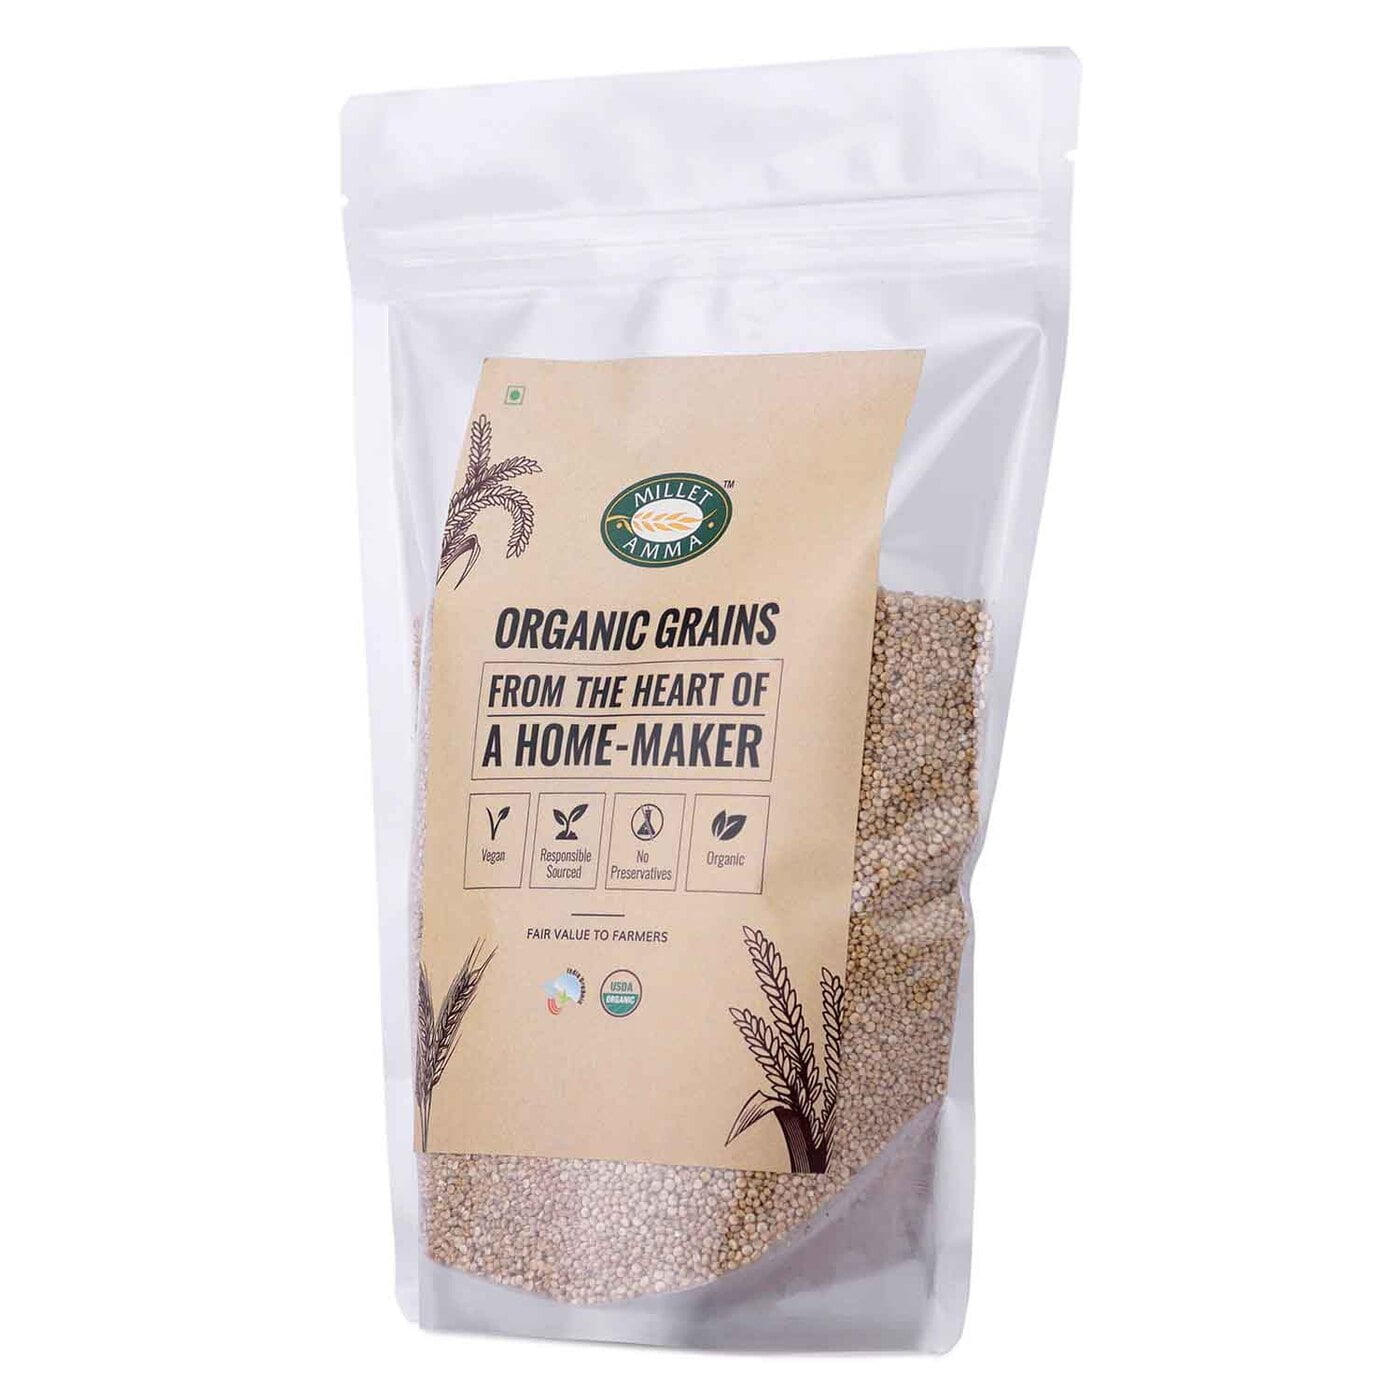 Millet Amma’s Organic White Quinoa Grains- Millet Amma’s Organic White Quinoa Grains are rich in minerals, amino acids and fiber.  It is a good source of antioxidants and vitamin E and has 3x more nutrients than brown rice and has a low glycemic index that may help weight management.  Quinoa is suitable for a Gluten-free diet.